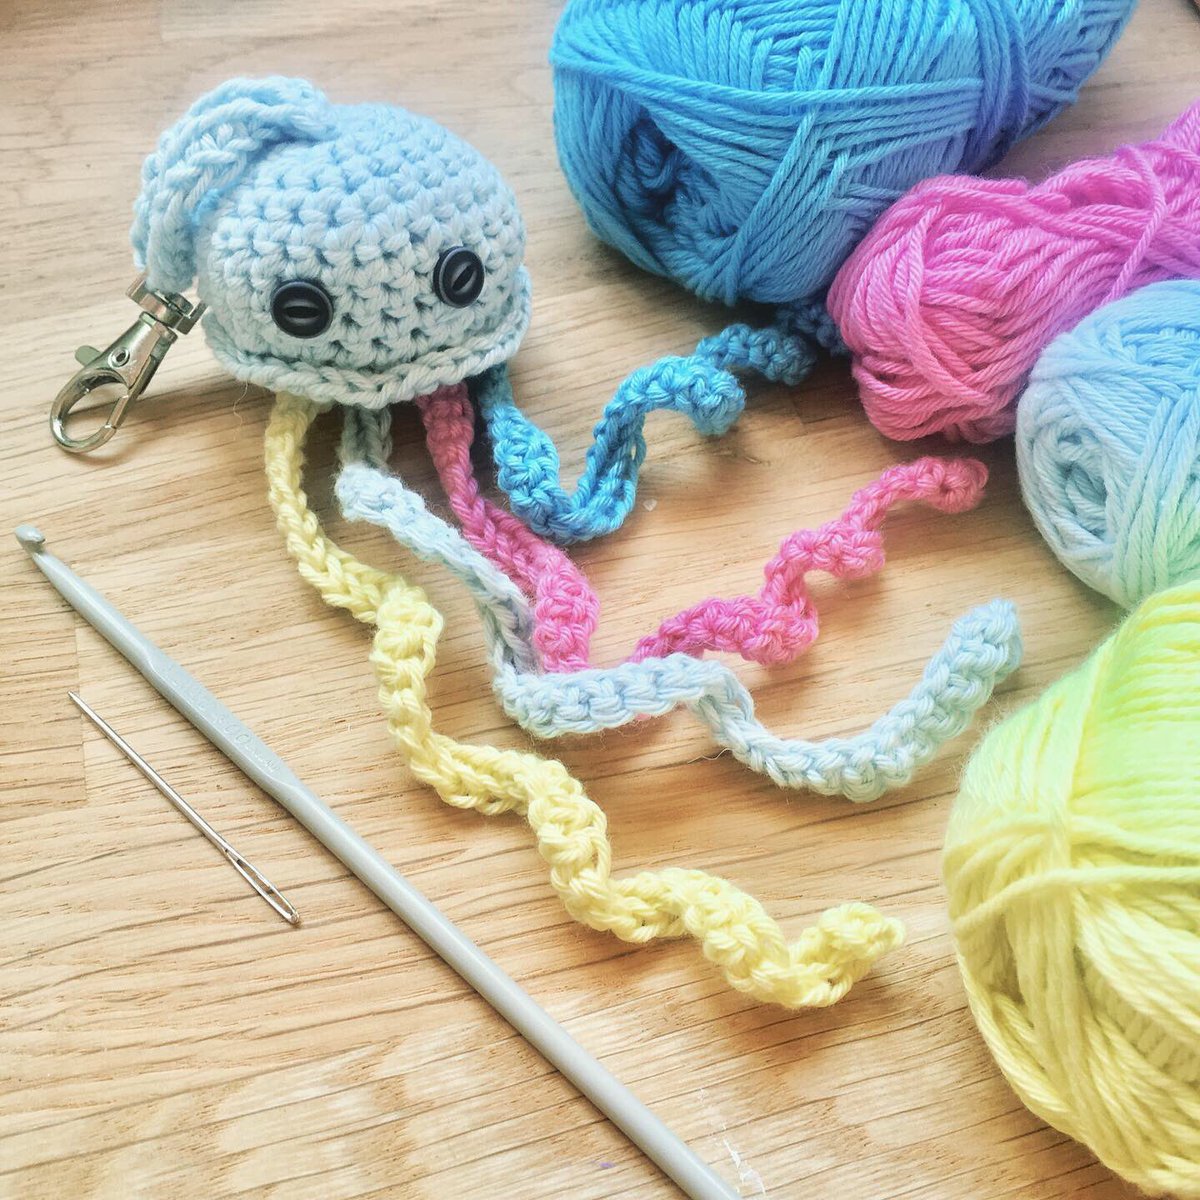 Learn to crochet ready for the autumn evenings - class this week at The Courtyard Tearooms in Poole Old Town #crochet #handmadehour #craftclass #poole #dorset #crafts #learnsomethingnew @WhatsOnInPoole